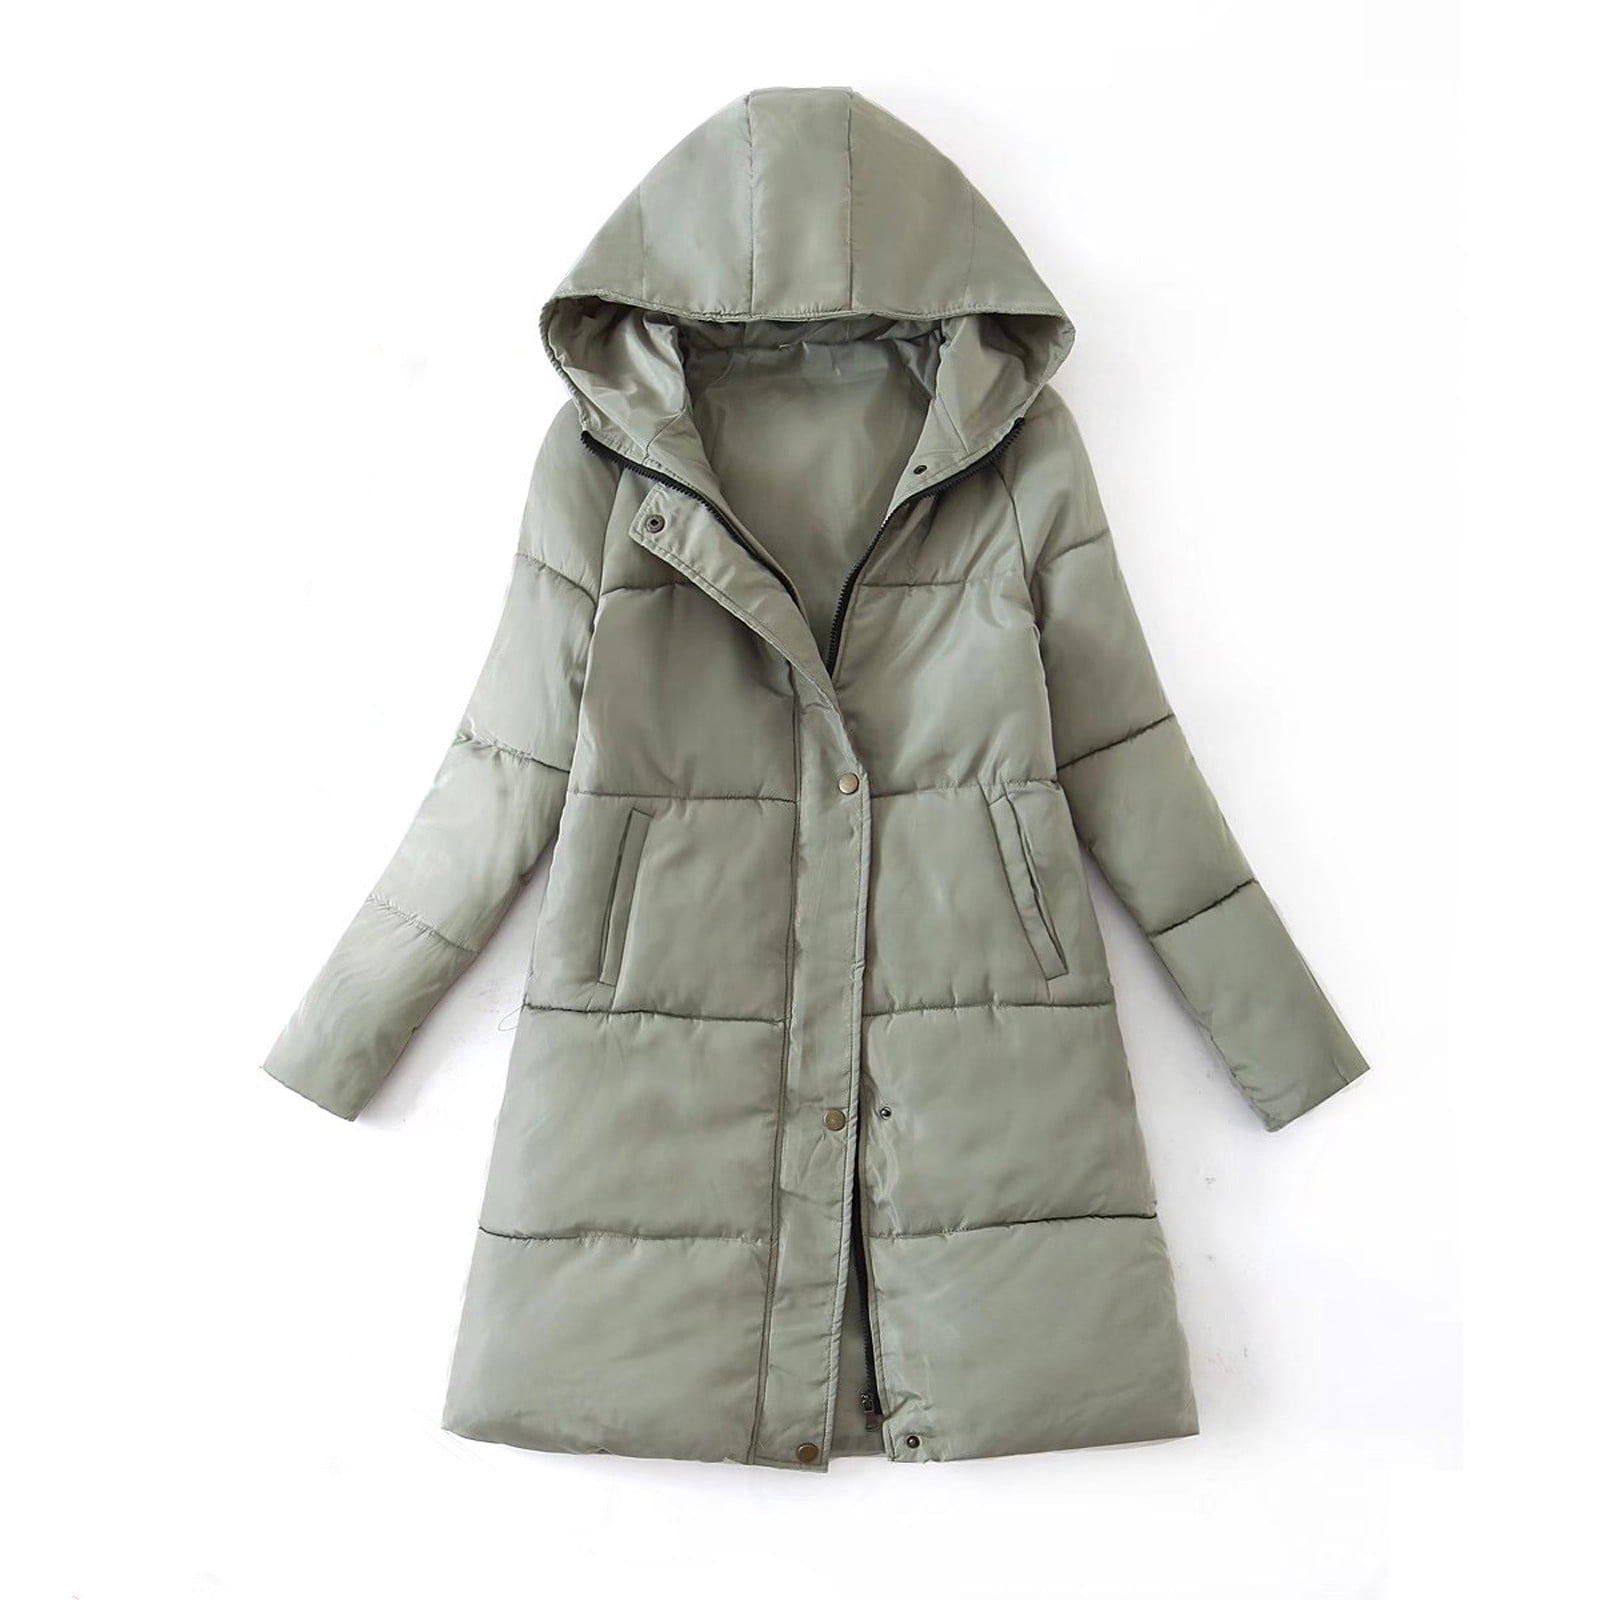 adviicd Maternity down Winter Jacket Long Coat Buttons Outwear Solid ...